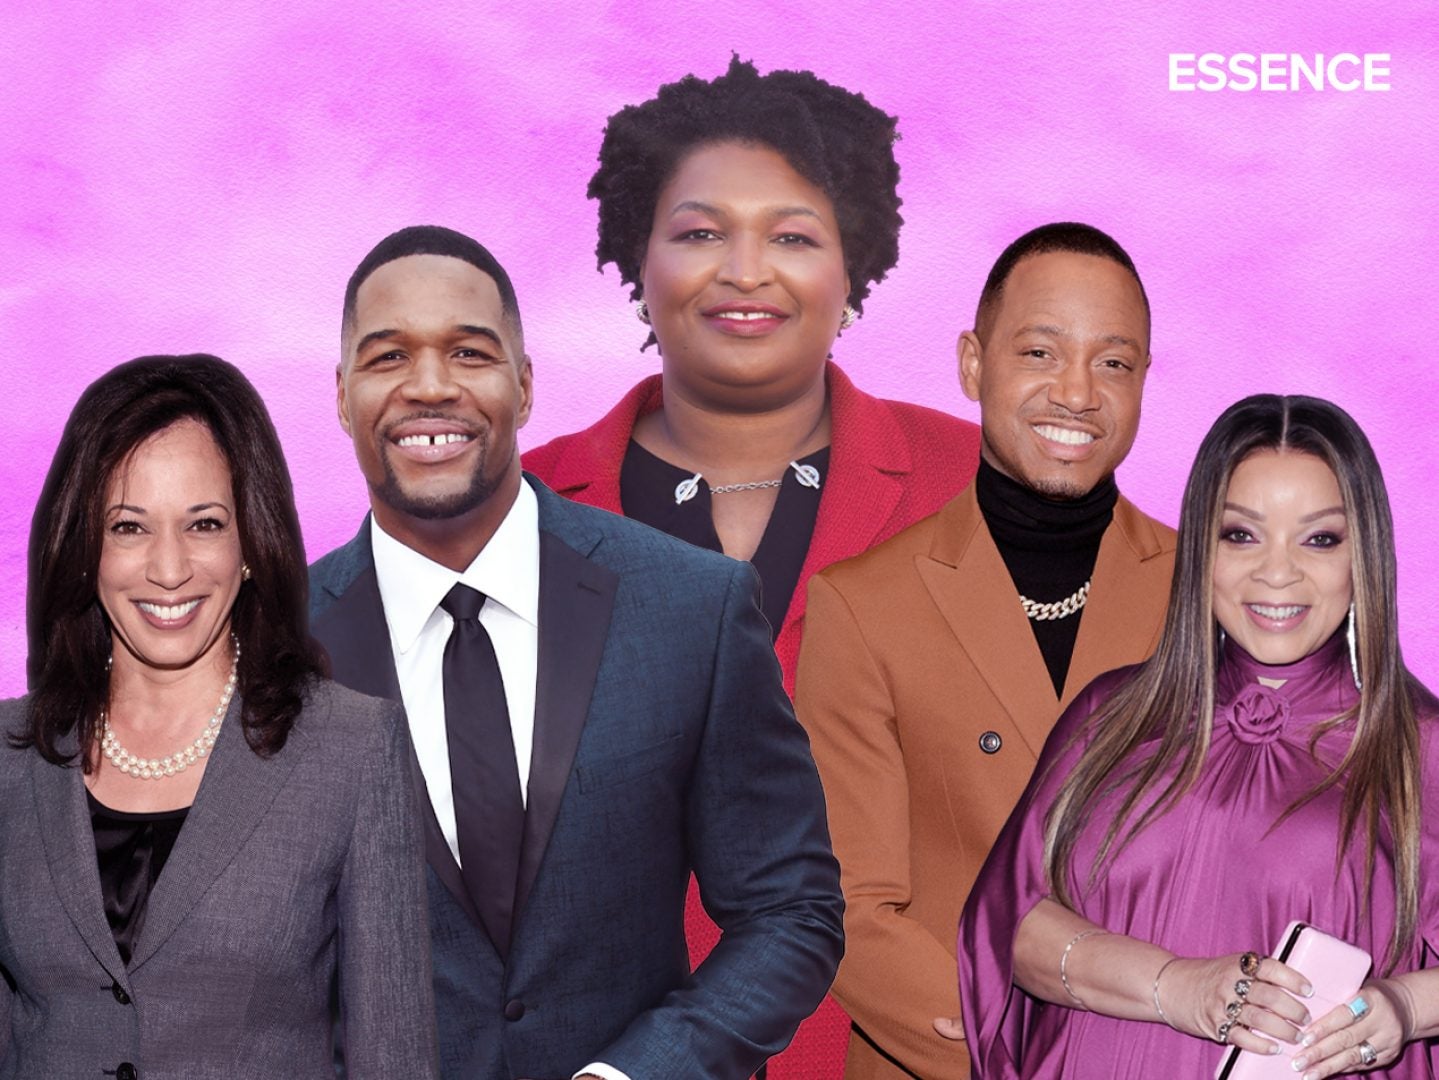 HBCU Love: ESSENCE CEO To Receive Honorary Doctorate From Texas College